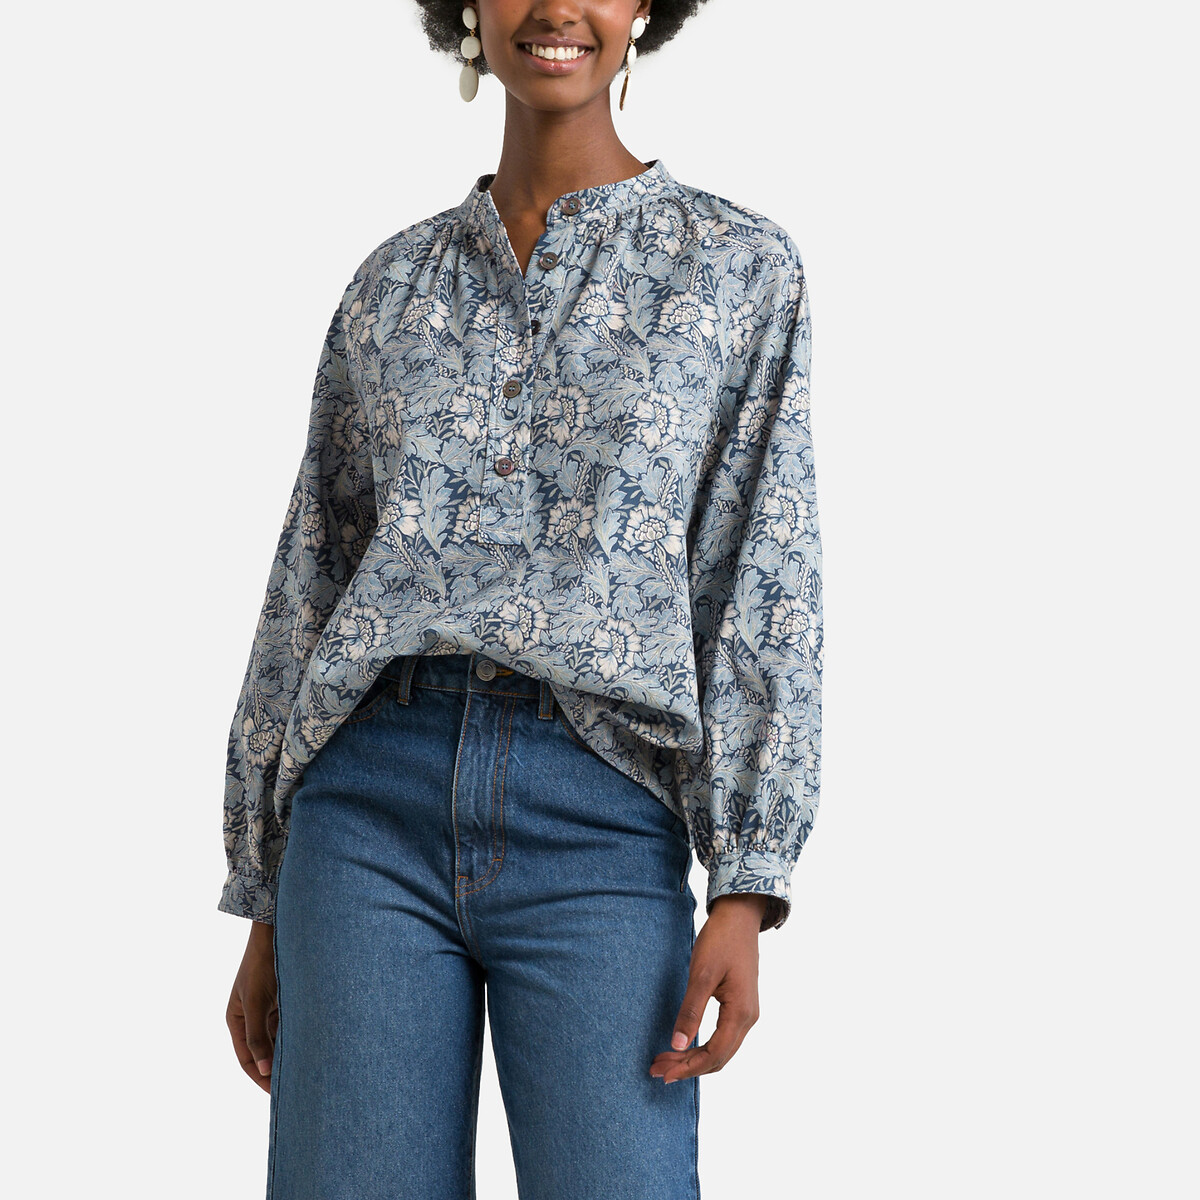 Floral/Leaf Print Blouse in Cotton with Long Sleeves